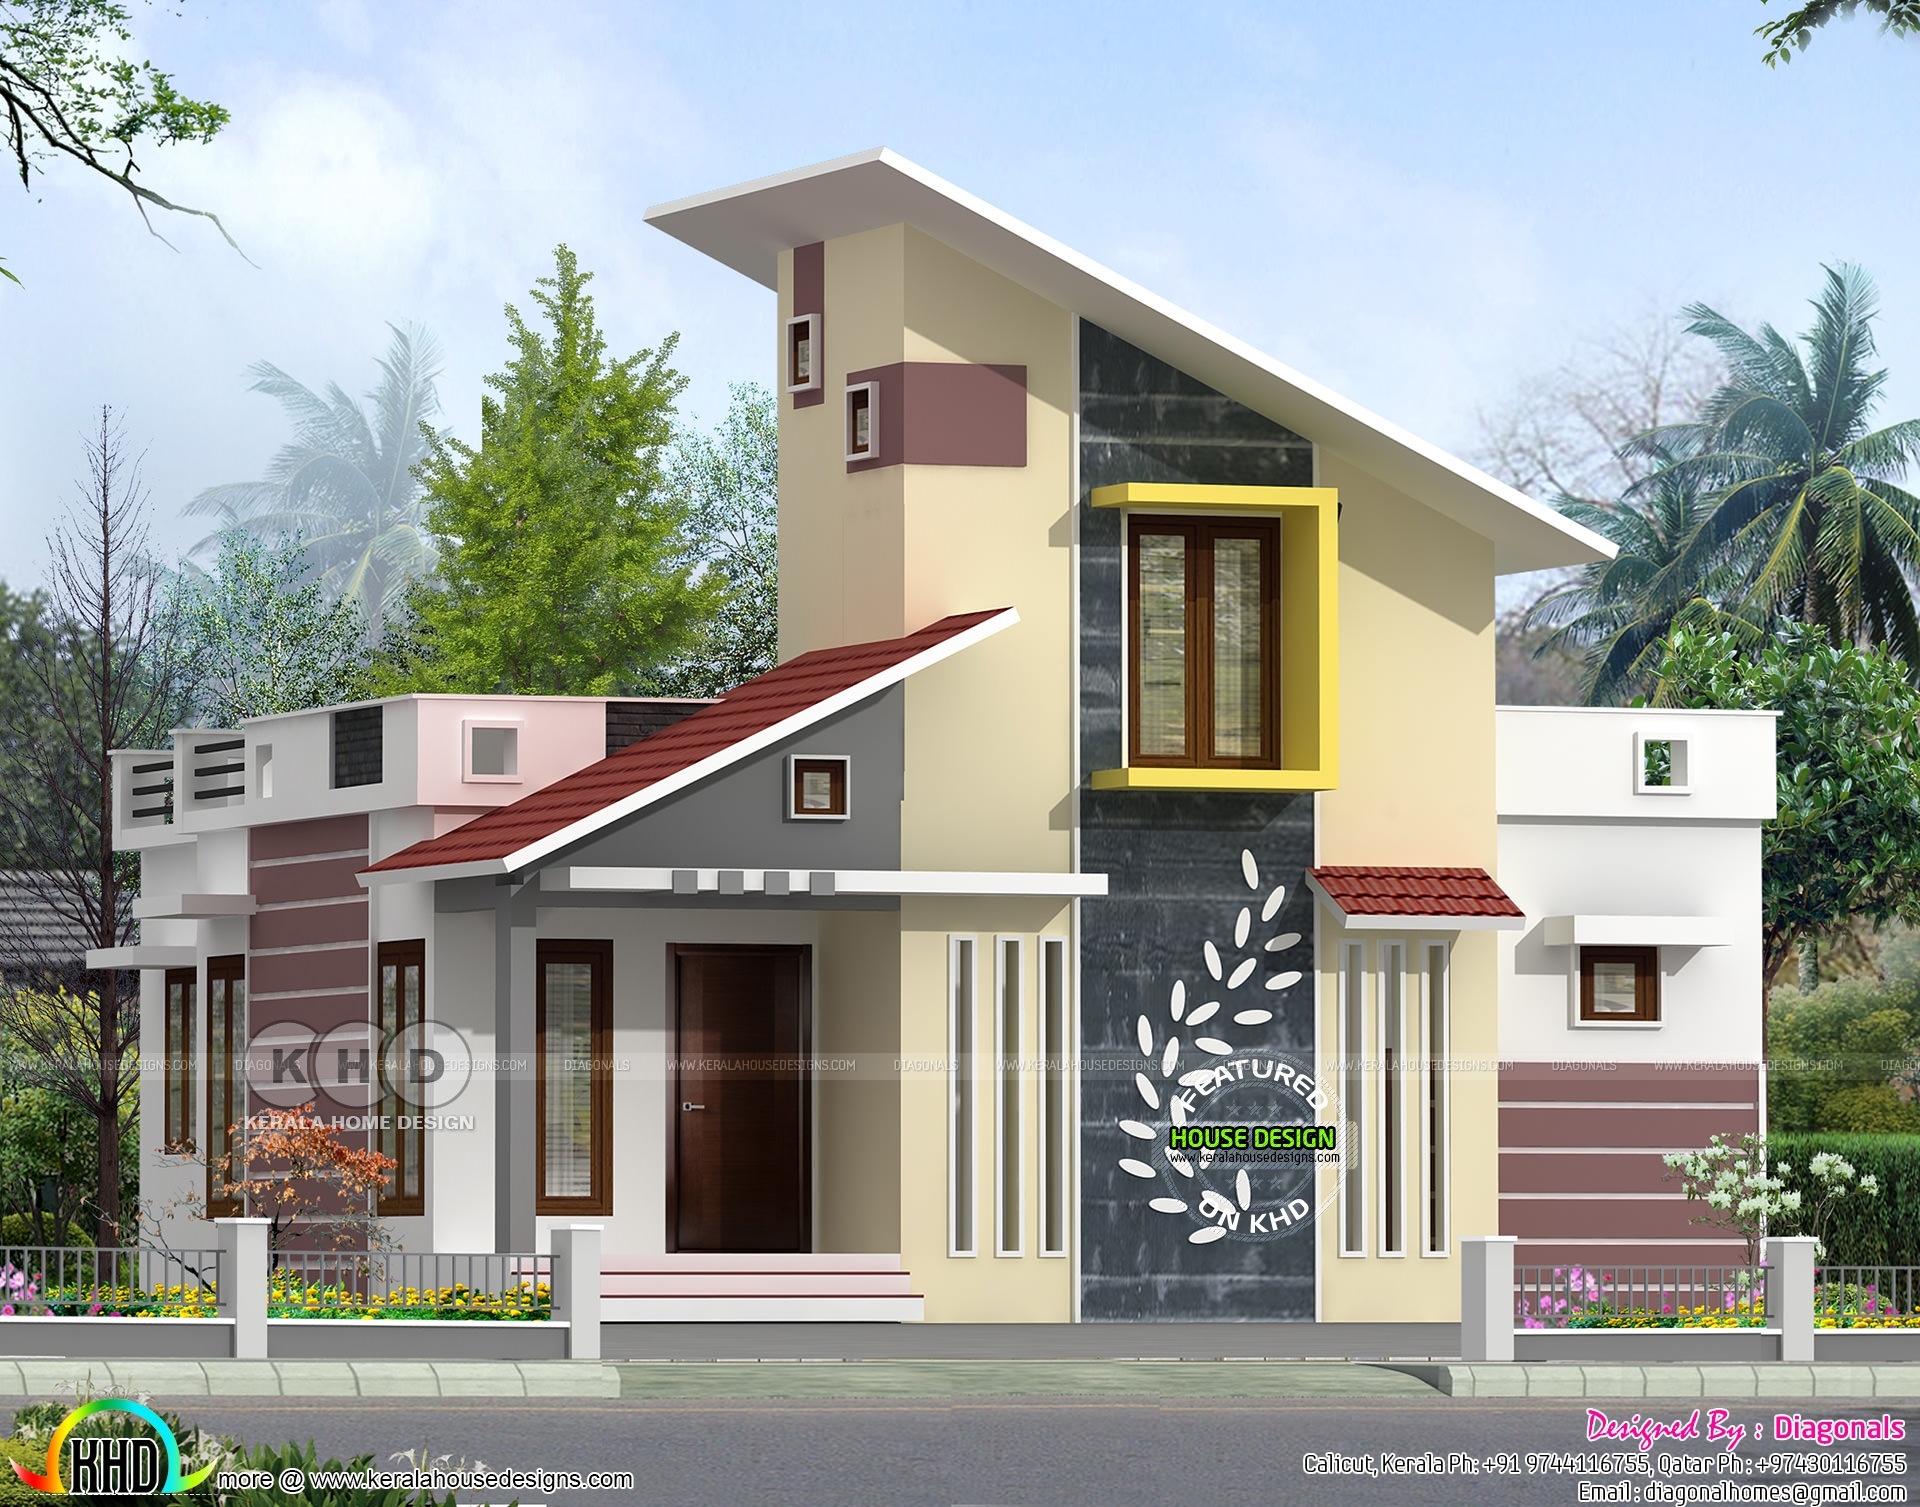 Classy modern single floor 3 bhk home 1200 sq ft kerala home design and within classy home images single floor